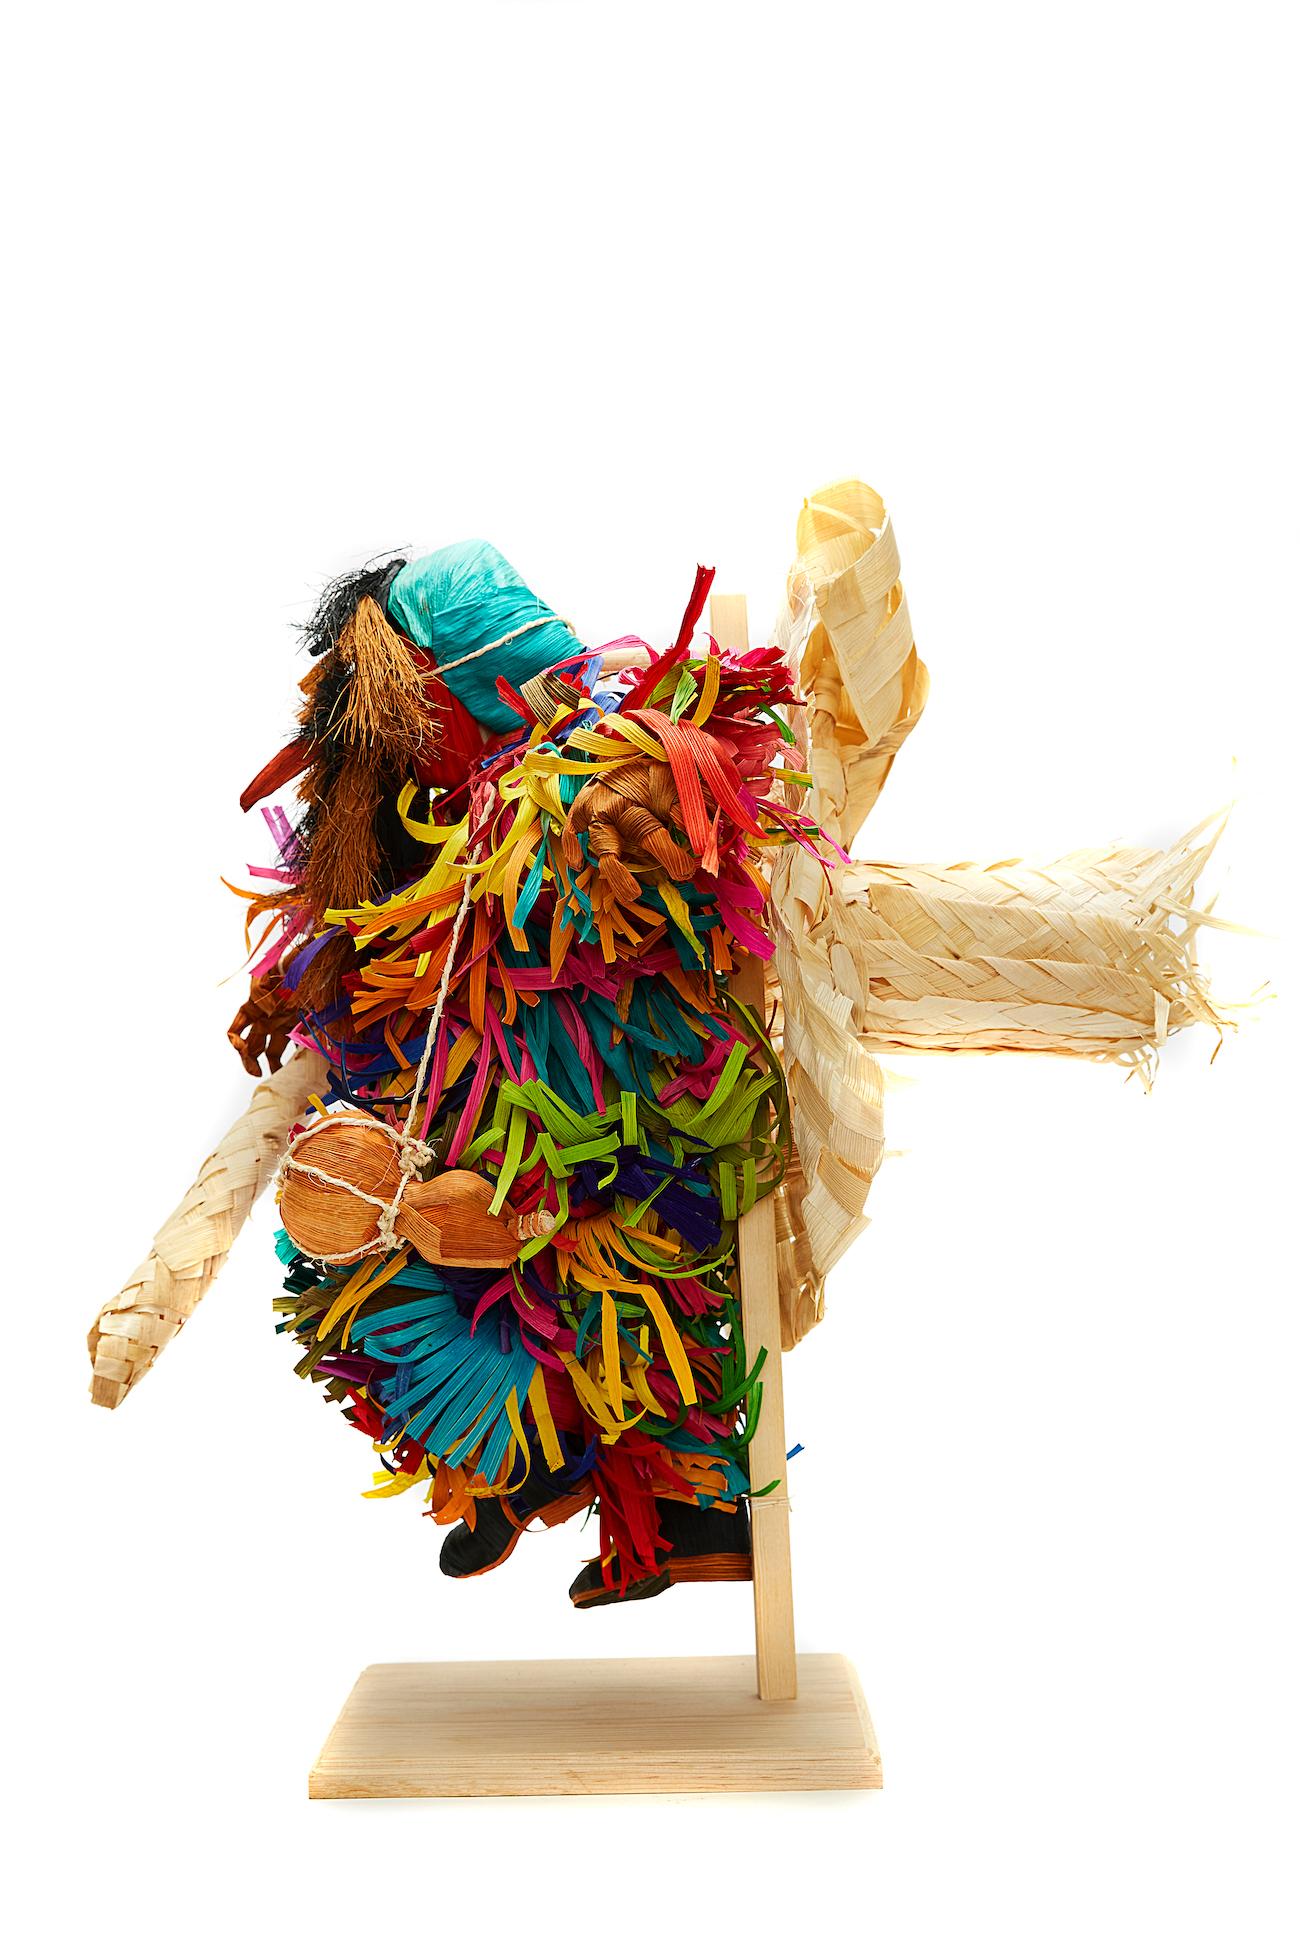 Tiliche de Putla
This Corn tiliche figurine is made of Totomoxtle, wire, wood and vegetable based paints.
At Cactus Fine Art, we offer an exclusive selection of handmade items from Mexico and Latin America’s most recognized artisans.